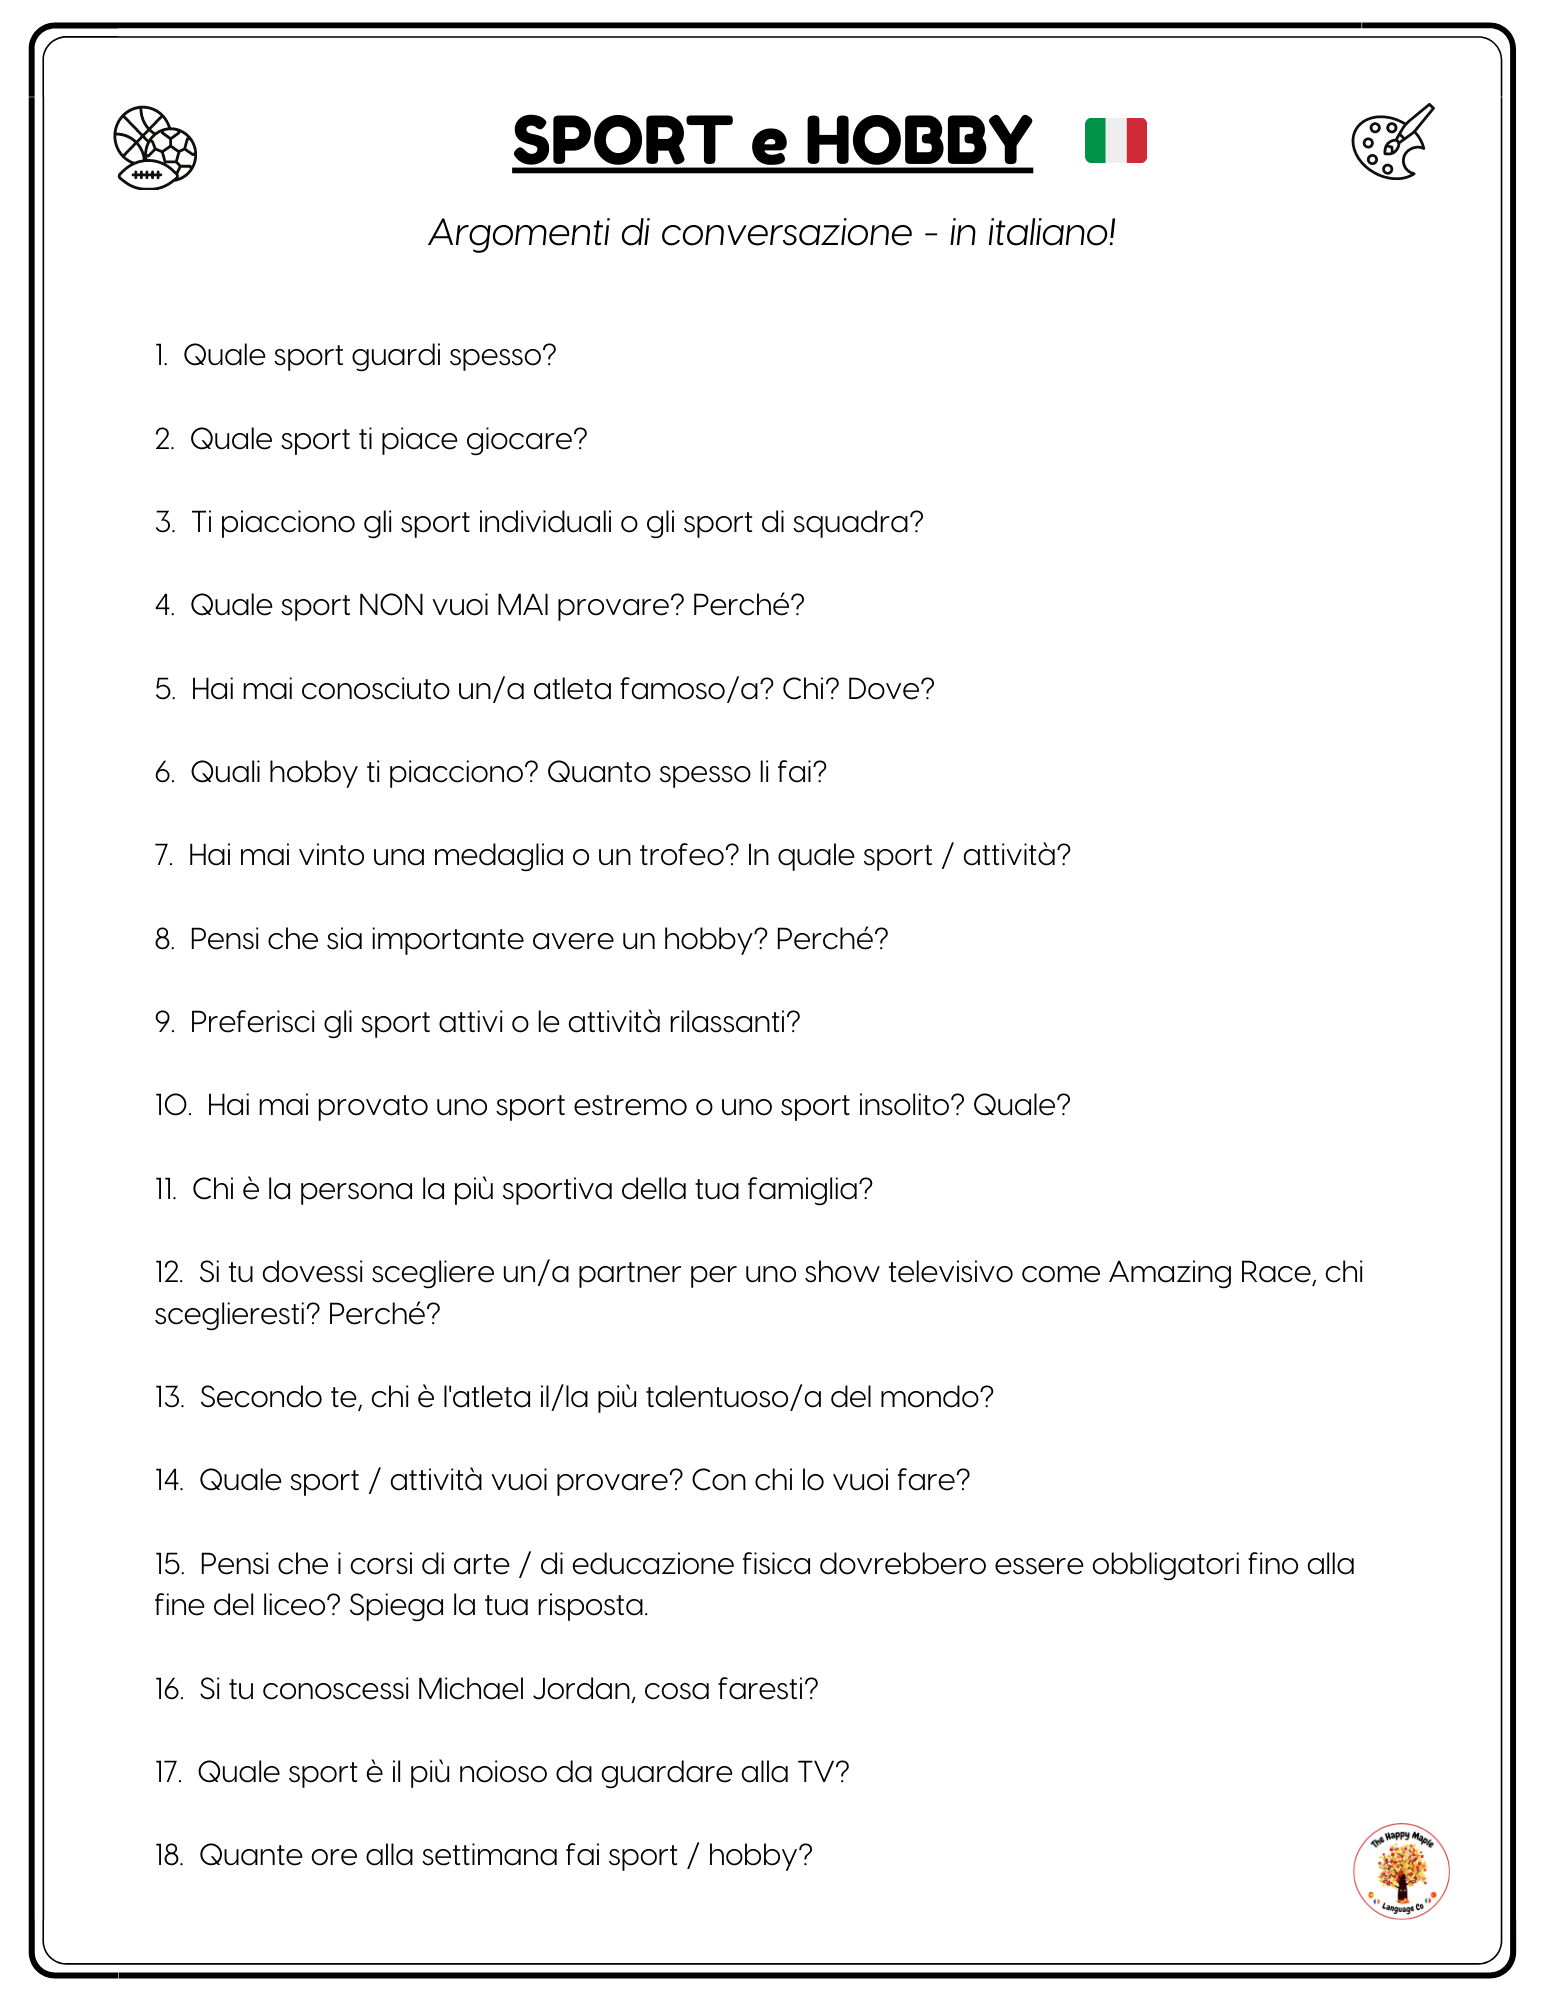 Italian Conversation Questions about Sports and Hobbies Free PDF Download